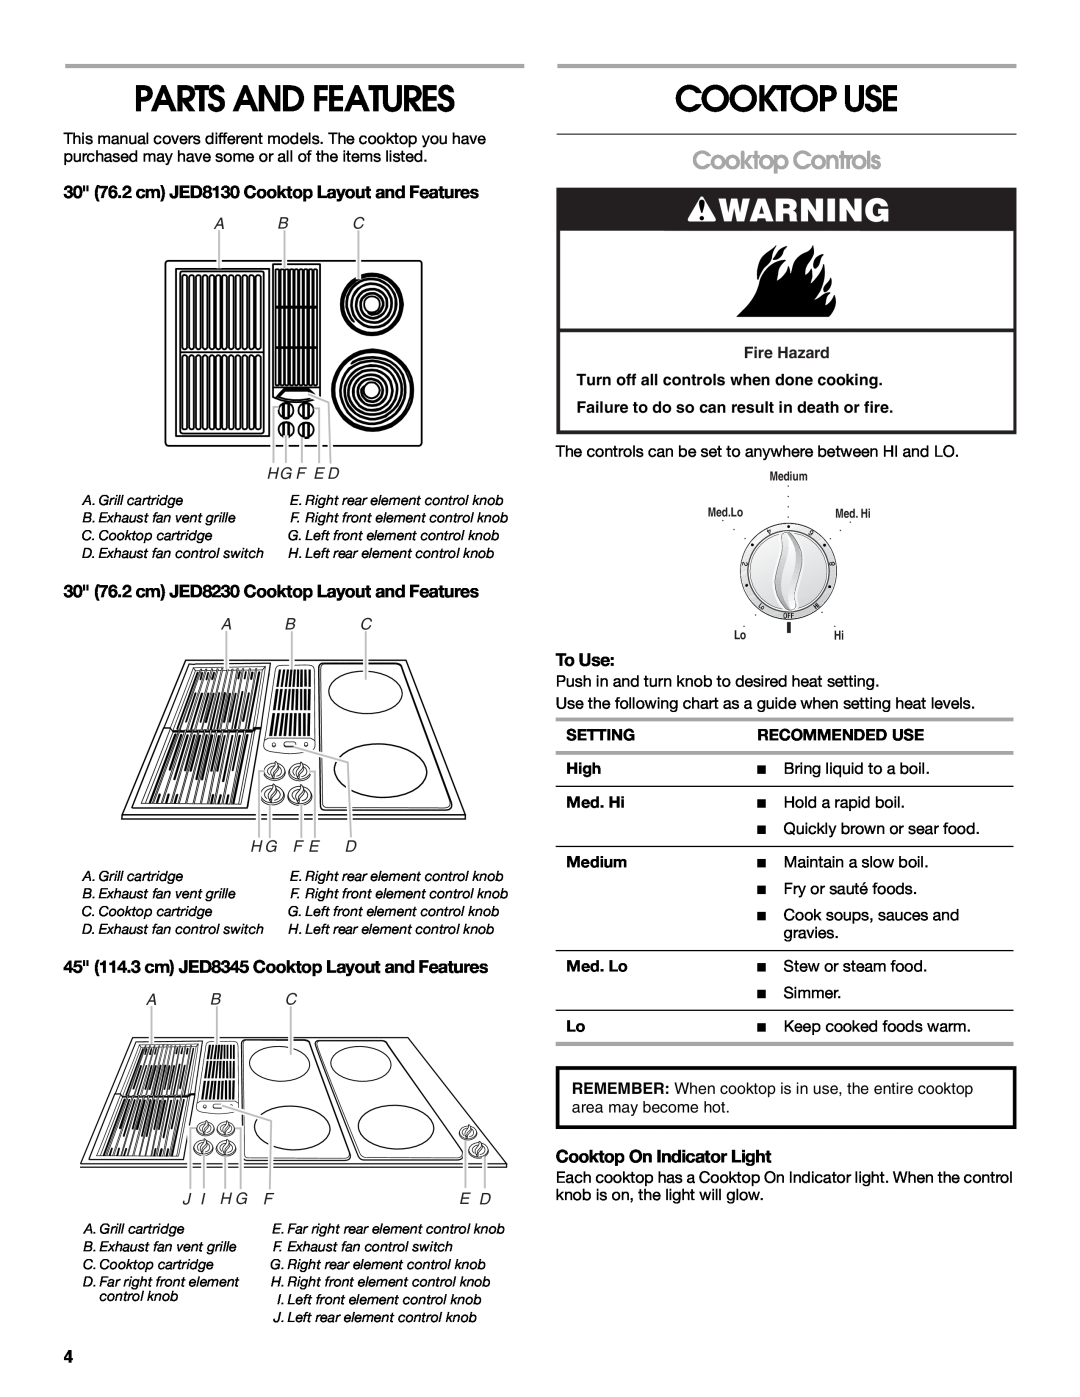 Jenn-Air W10298938A Parts And Features, Cooktop Use, Cooktop Controls, 30 76.2 cm JED8130 Cooktop Layout and Features 